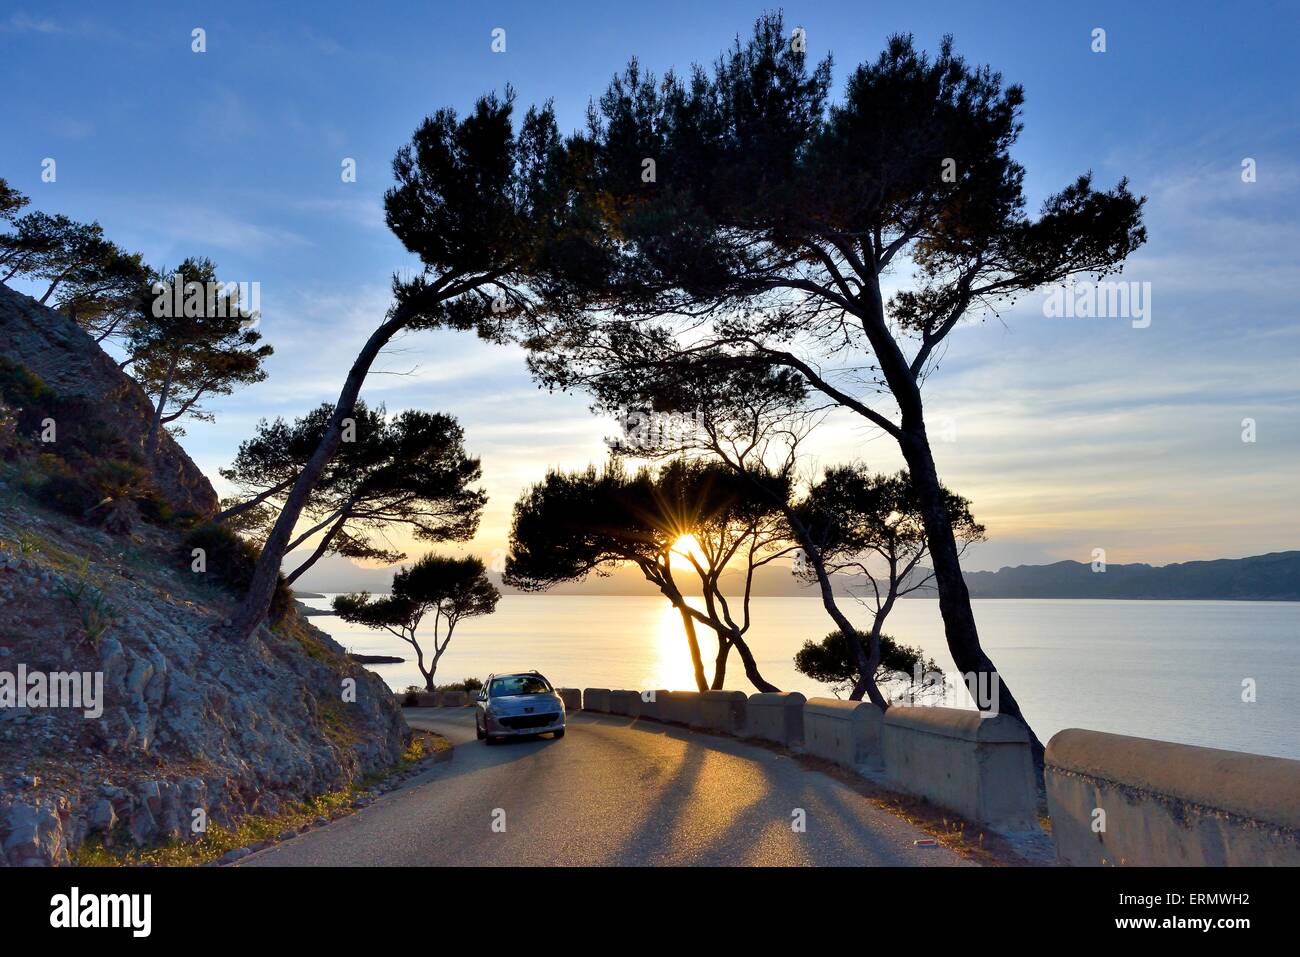 Pine trees in the sunset on a country road, near Alcudia, Majorca, Balearic Islands, Spain Stock Photo